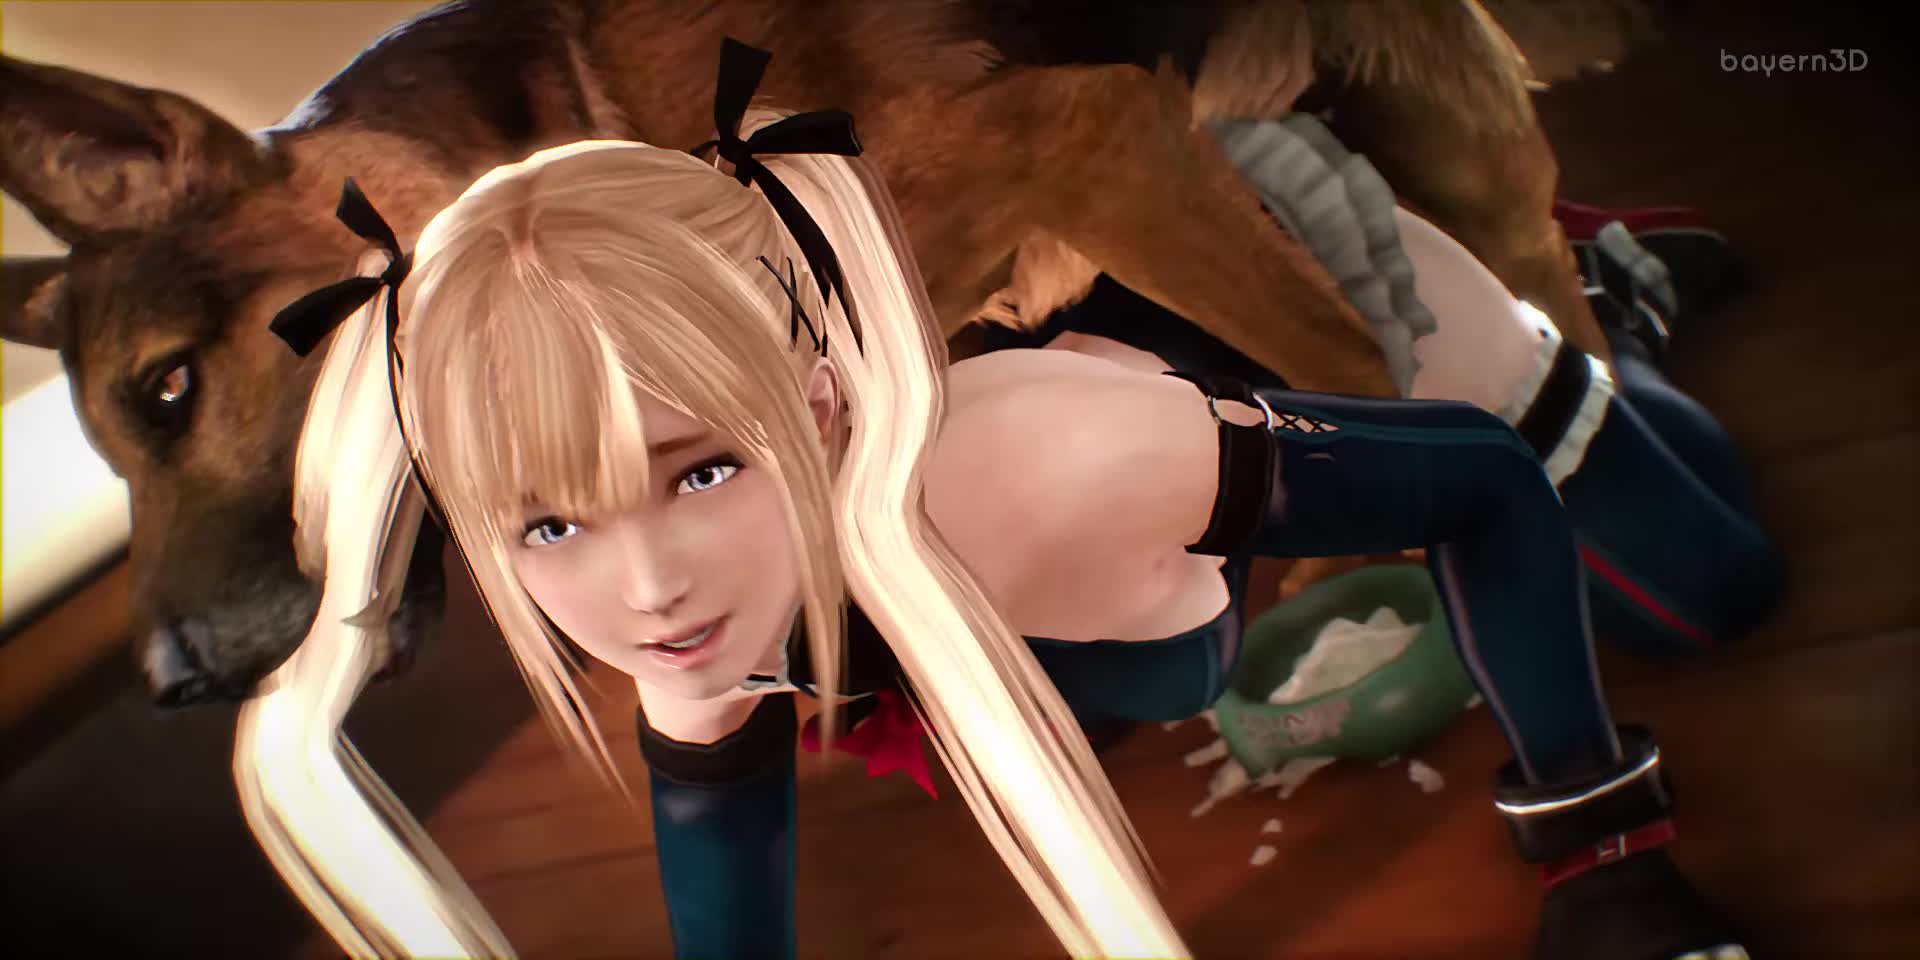 Marie Rose Canine Tagme - Unsorted Videos R34 Webm Animation. 